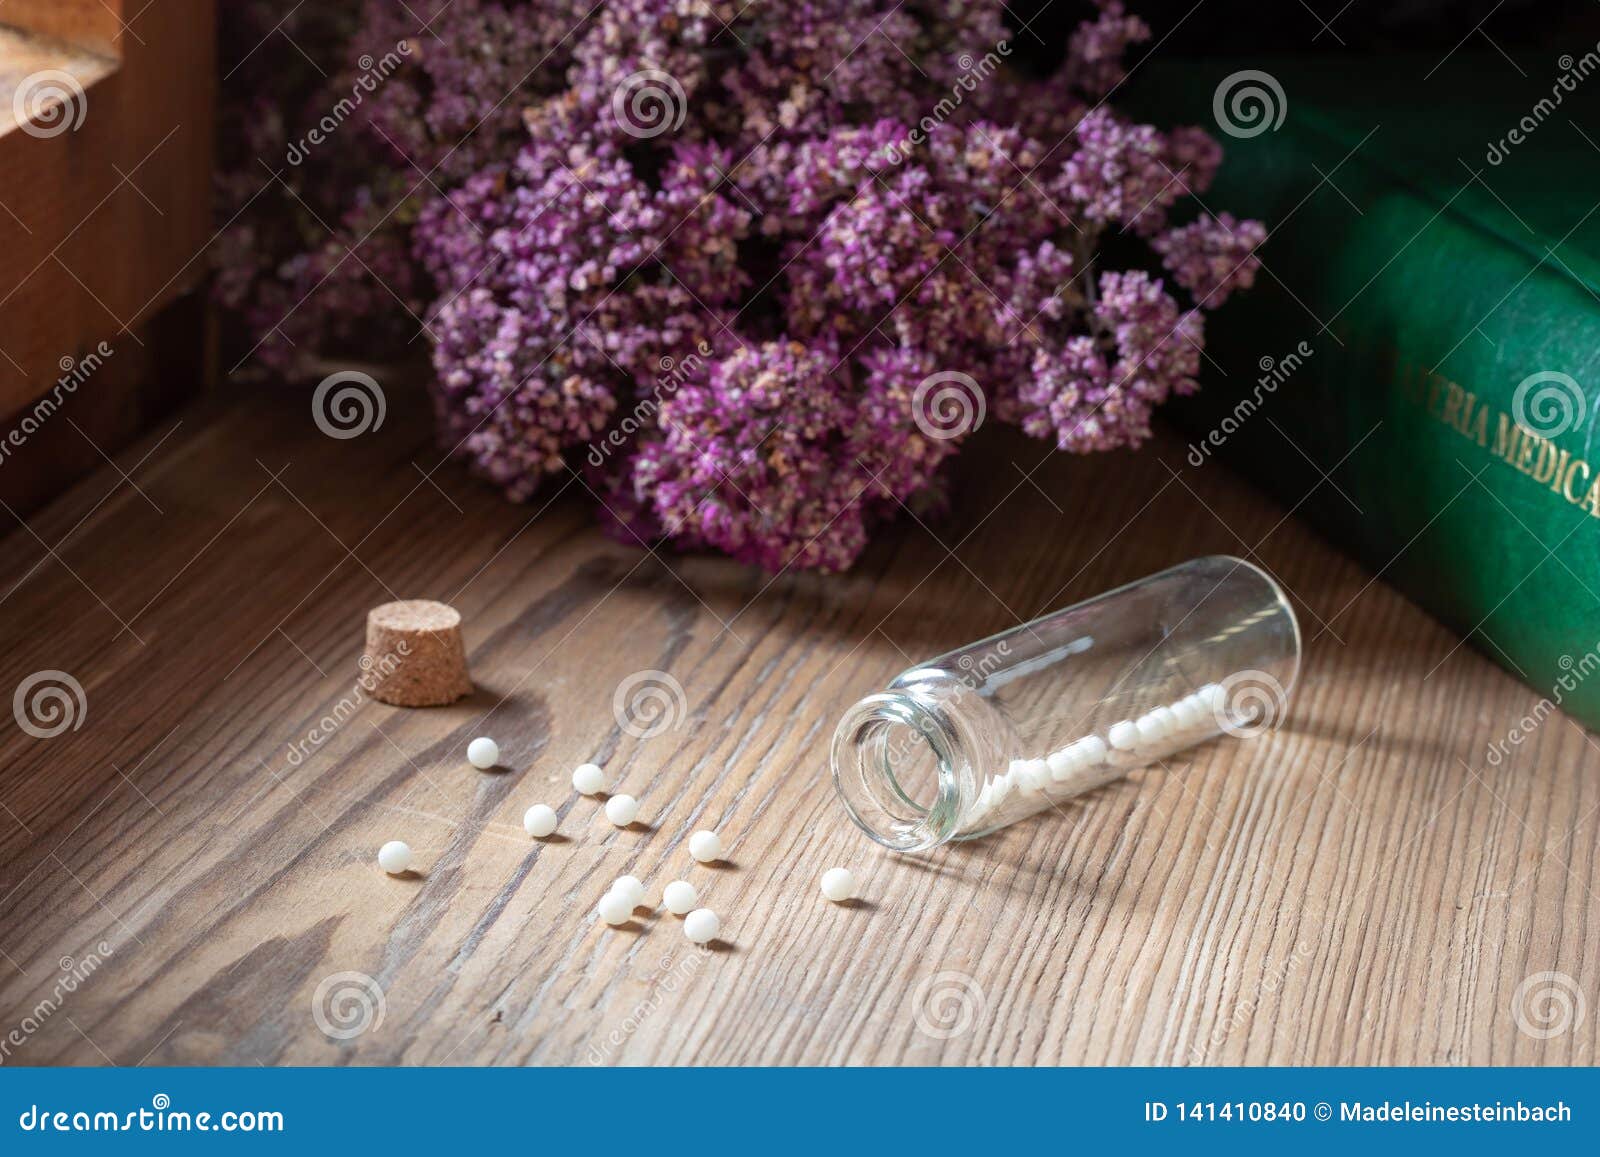 a bottle of homeopathic globules with dried herbs and materia medica